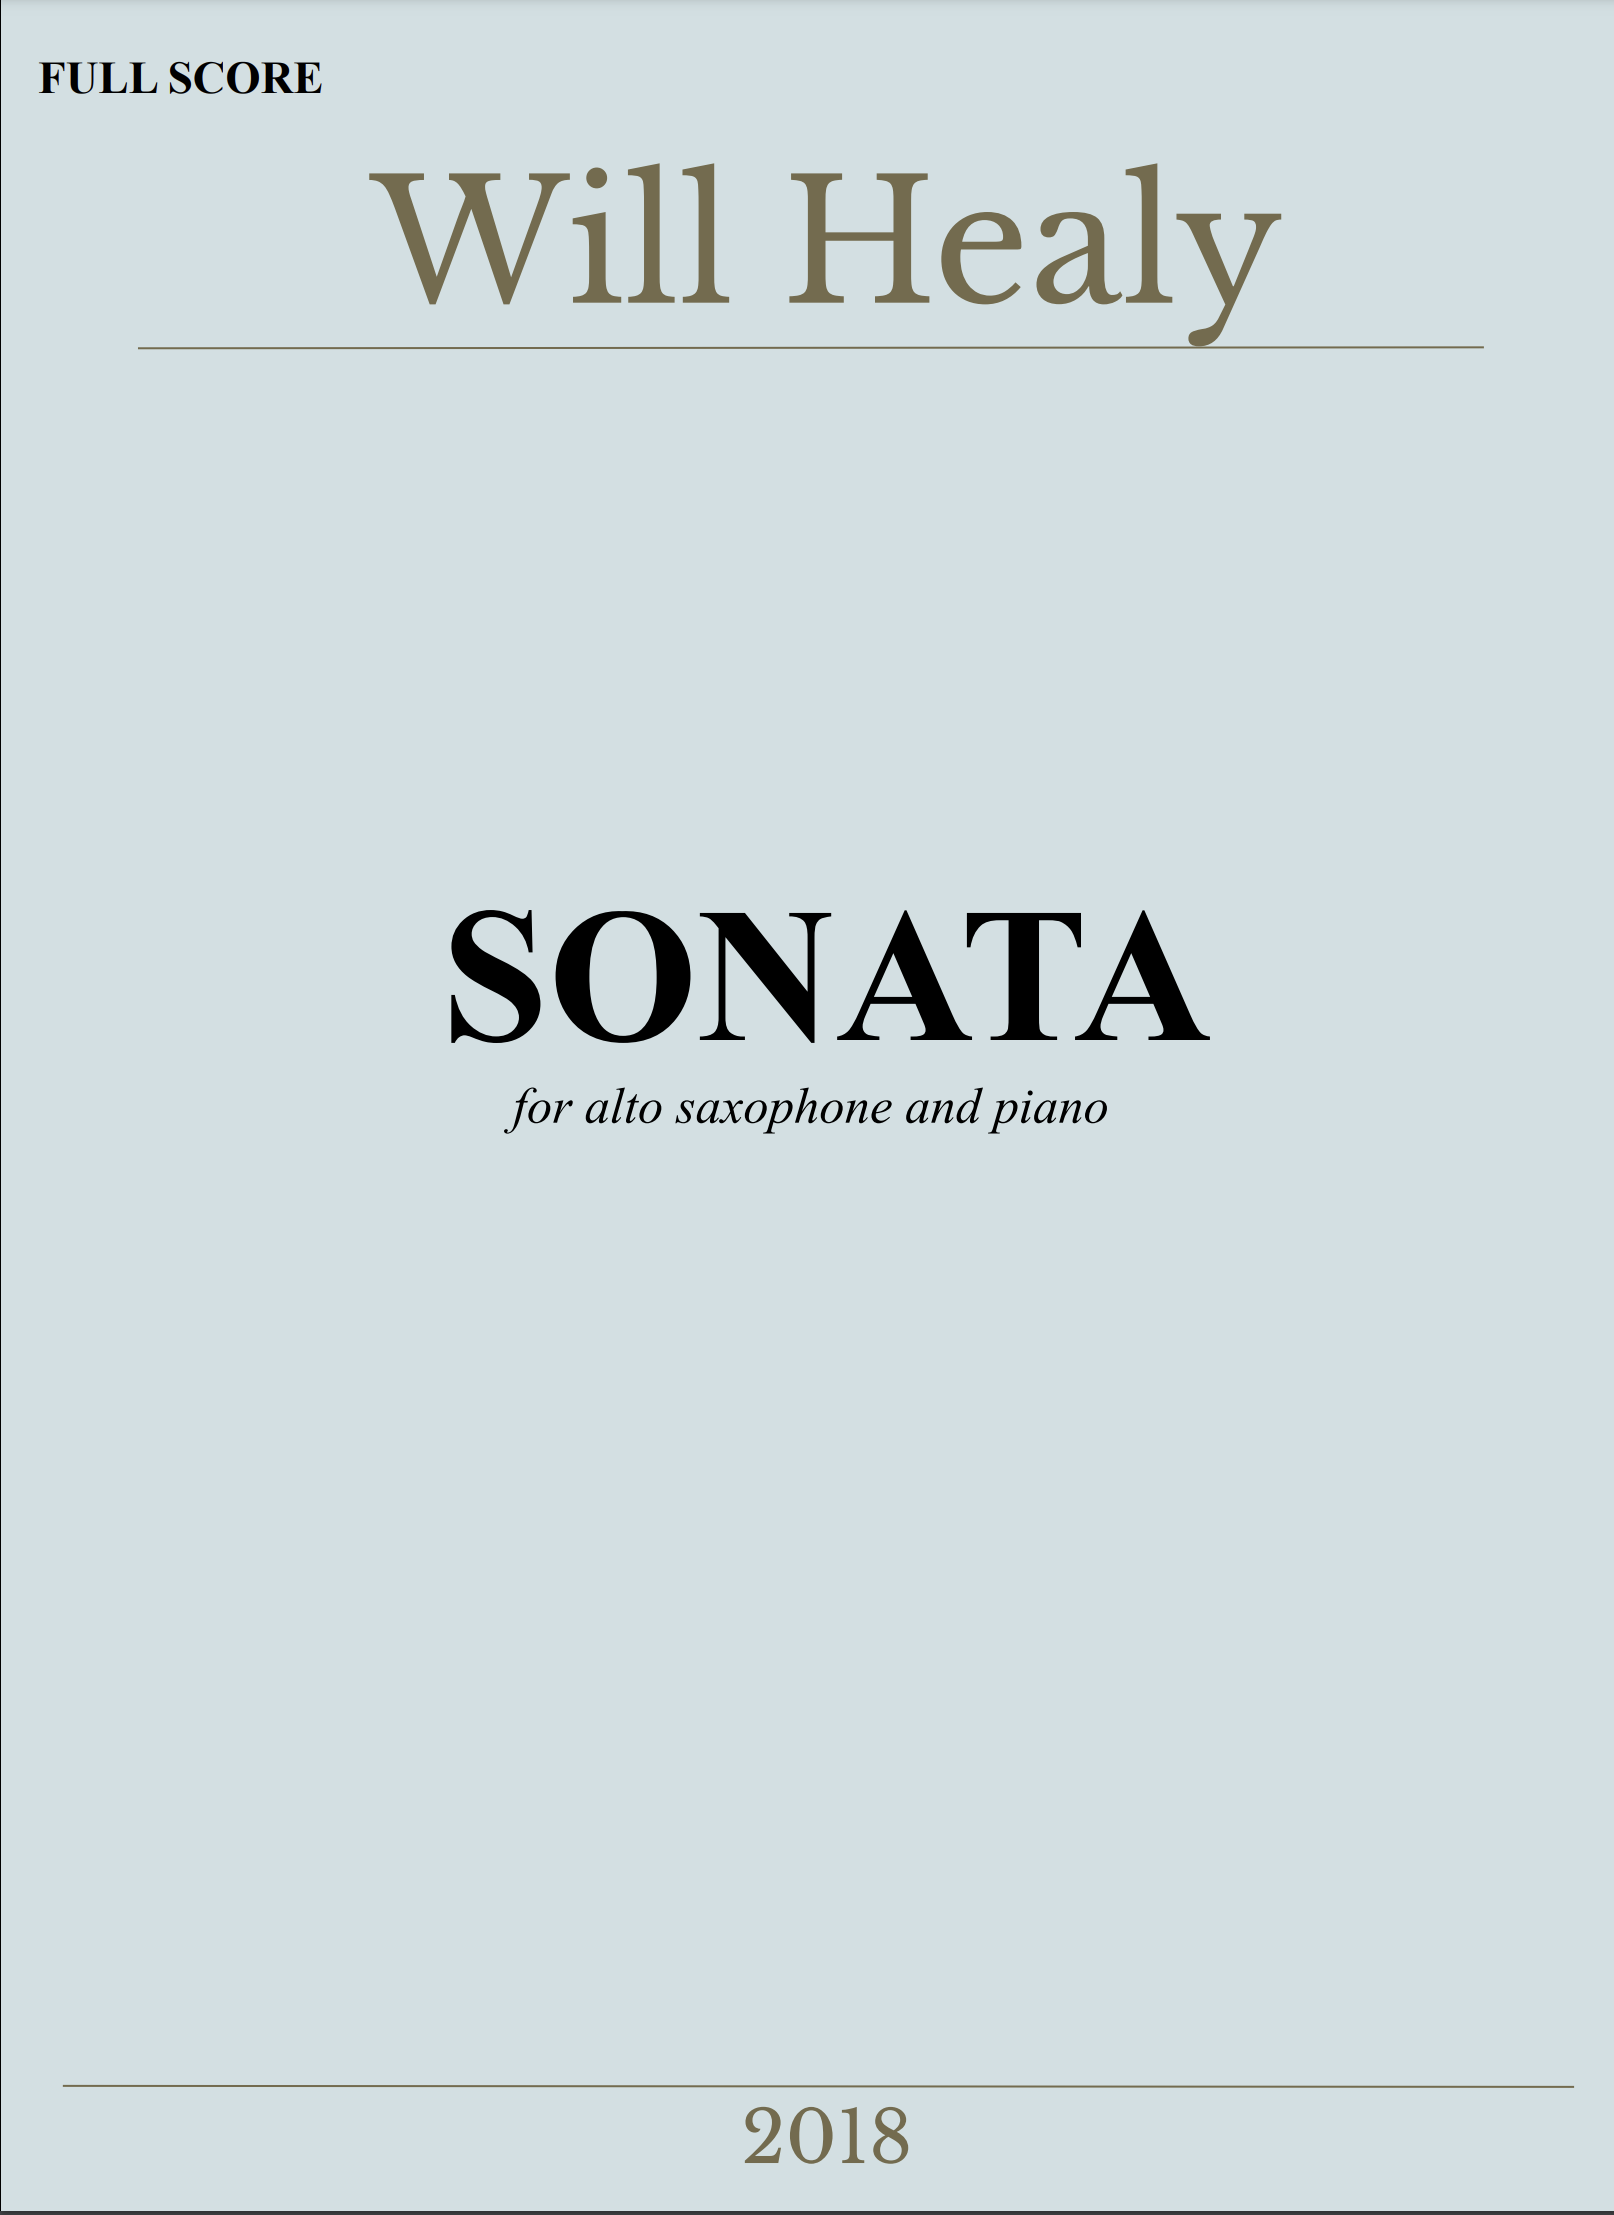 Sonata For Alto Saxophone And Piano by Will Healy